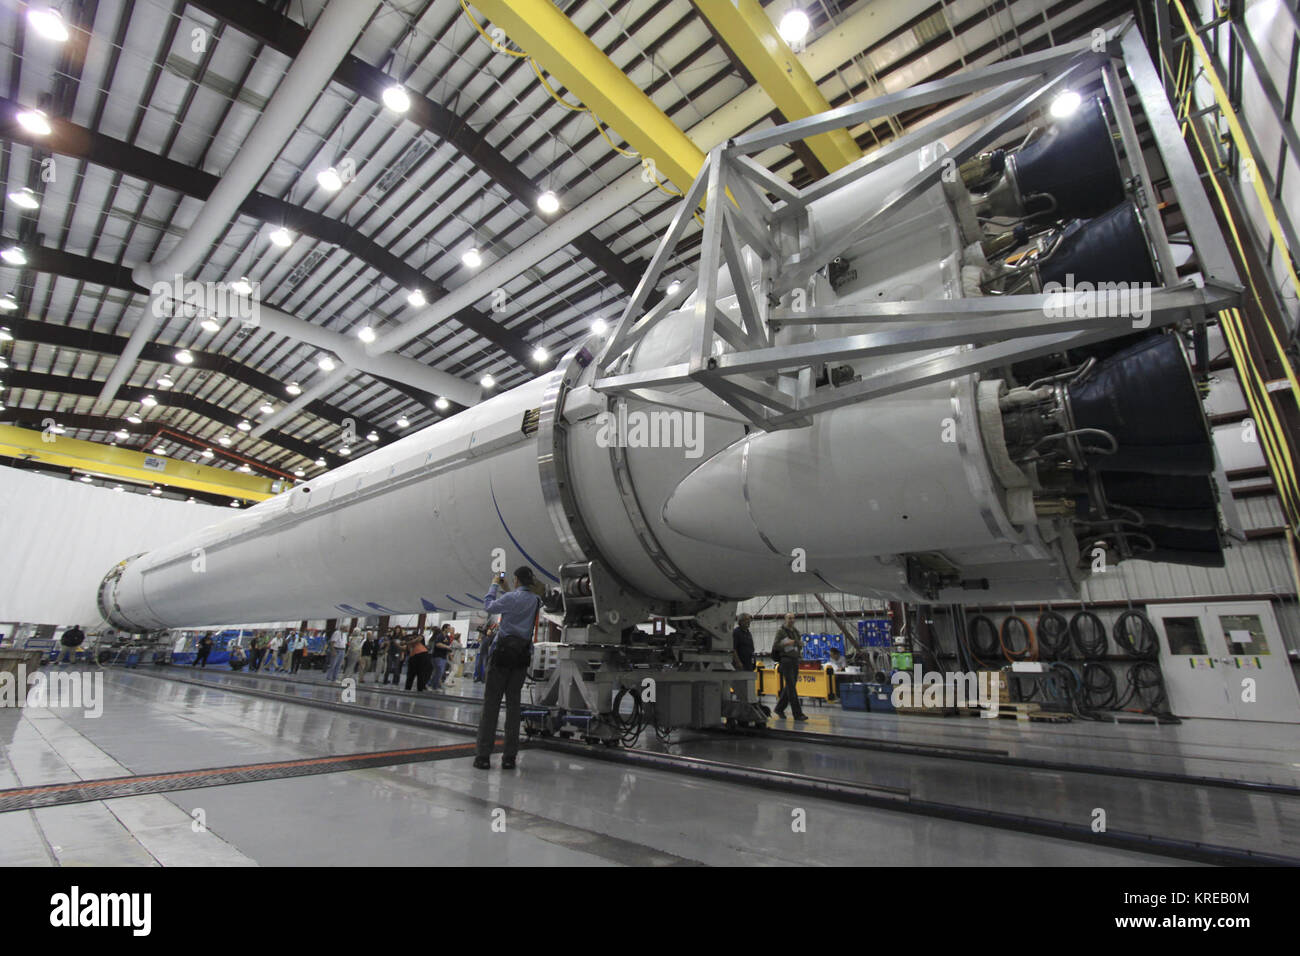 Falcon 9 at SLC-40 during media event (KSC-2011-7886) Stock Photo